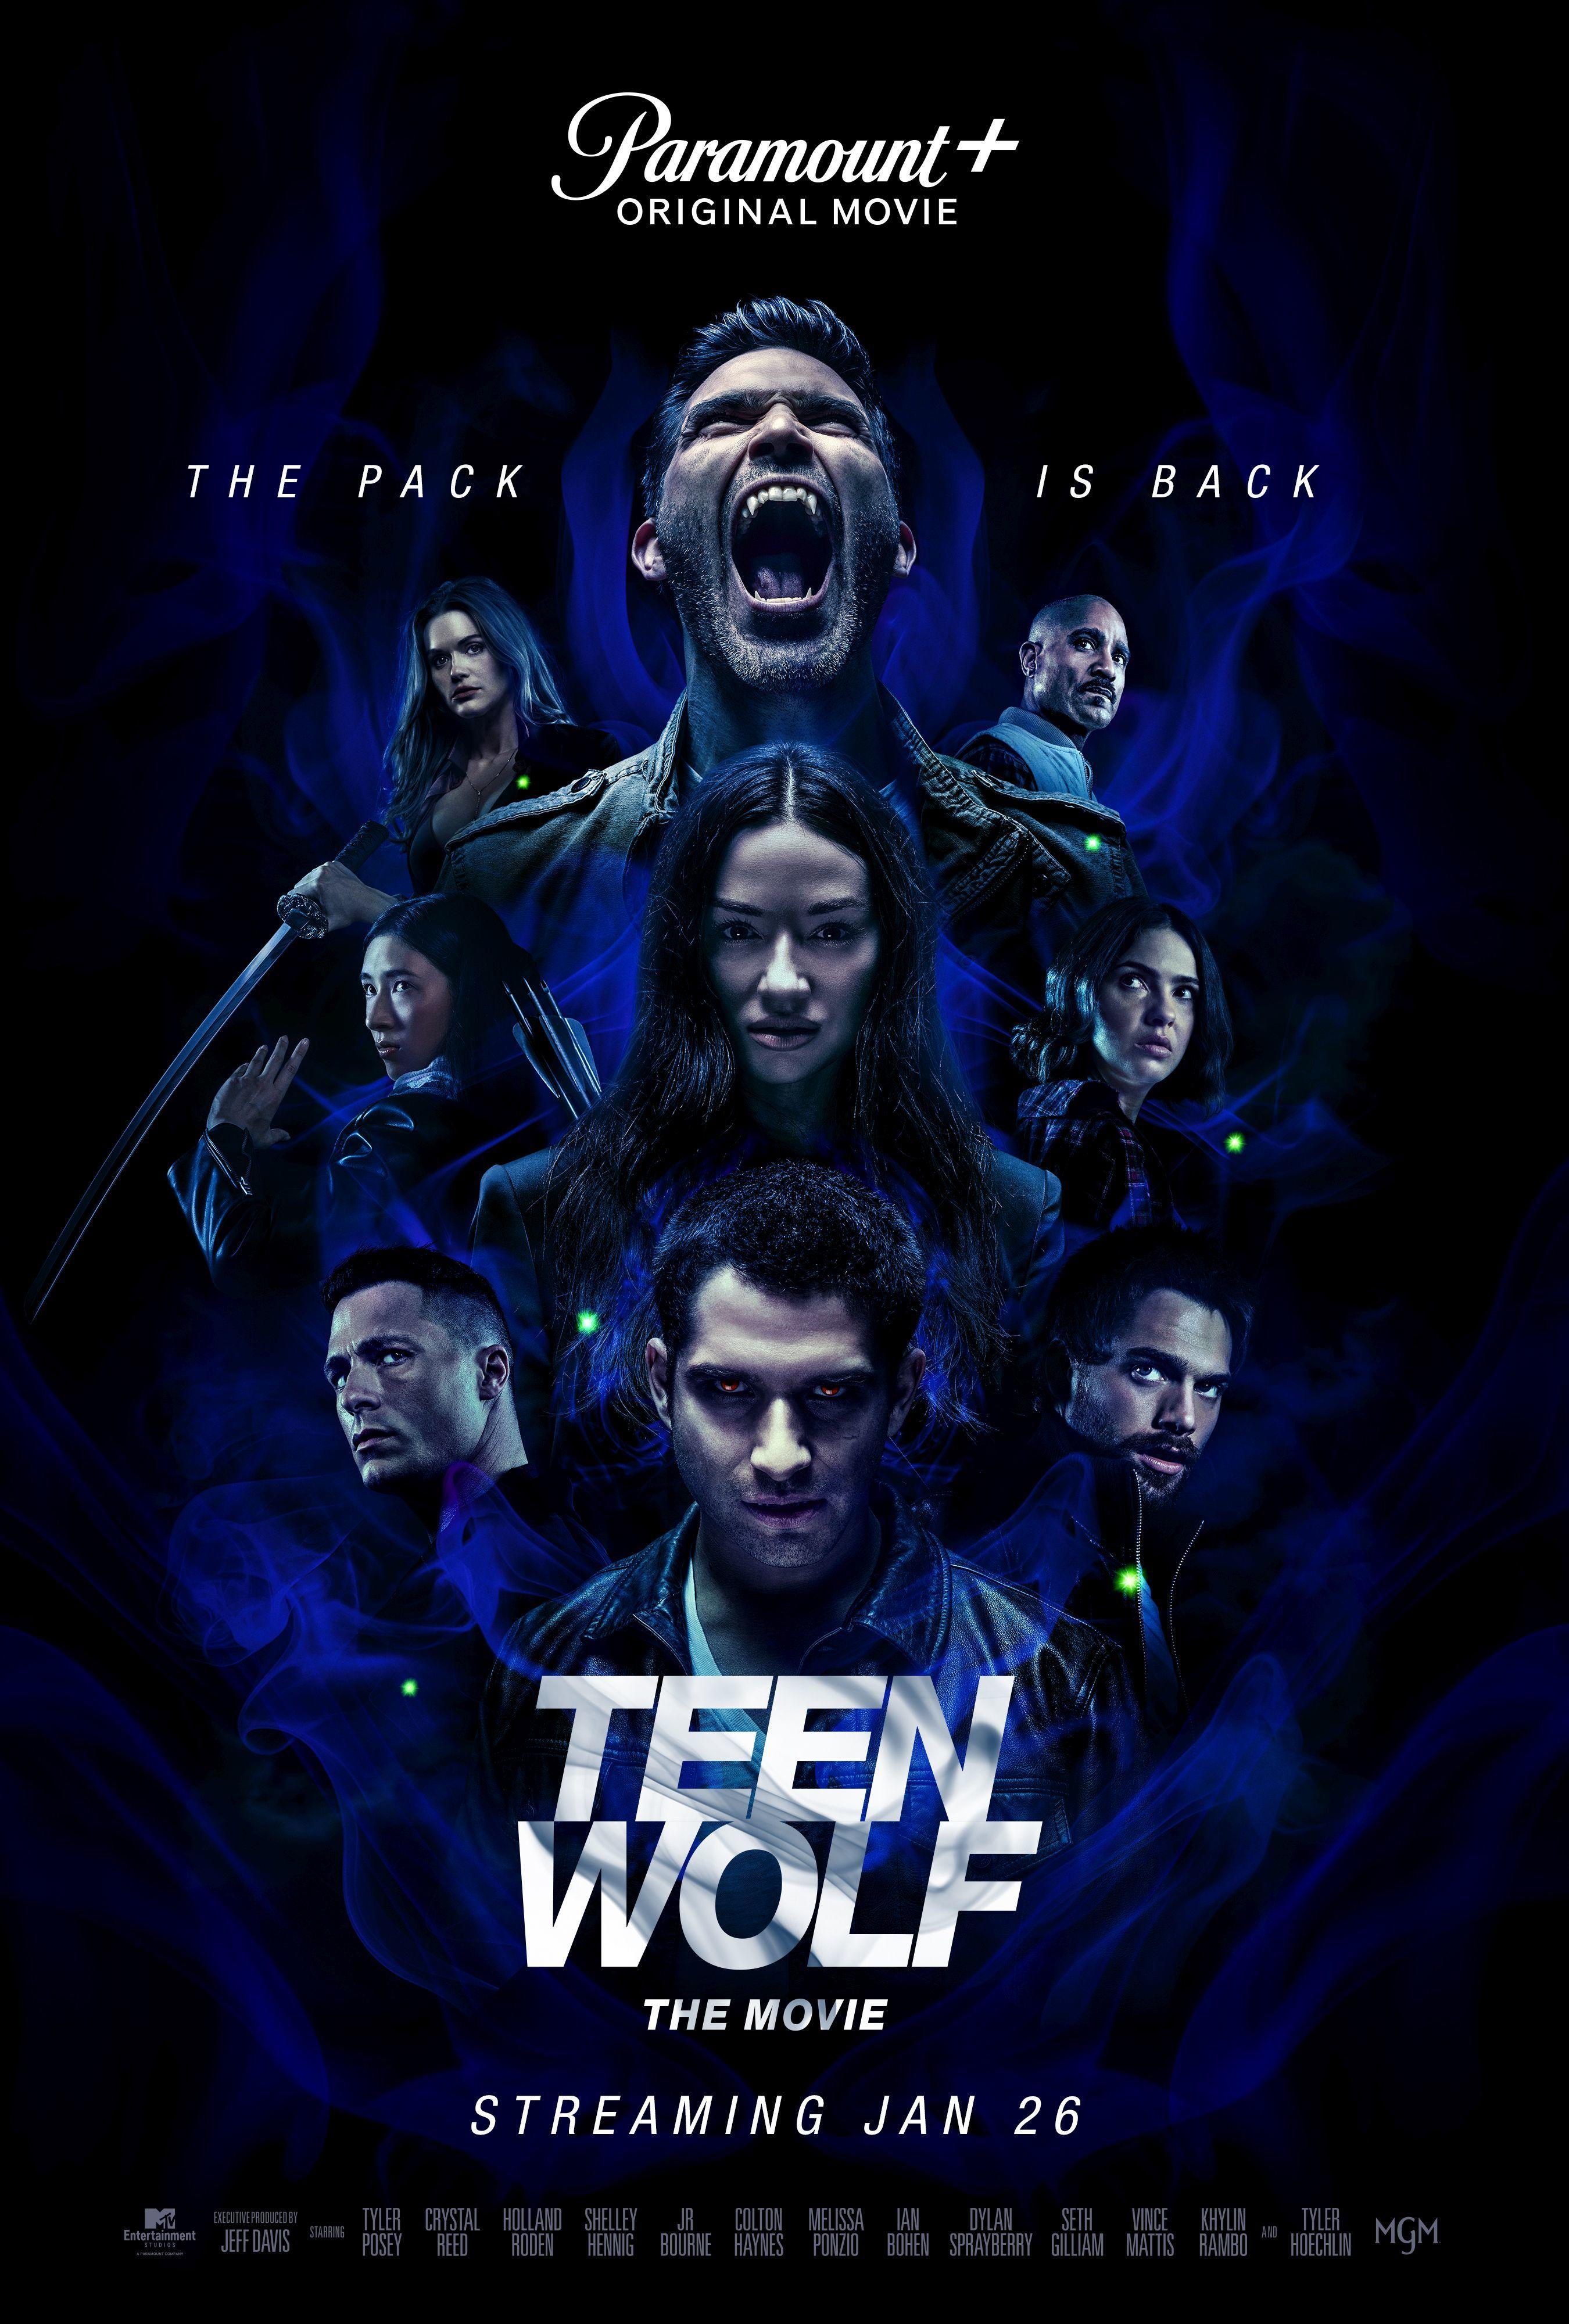 Teen Wolf: The Movie Poster Revealed by Paramount+ (Exclusive)